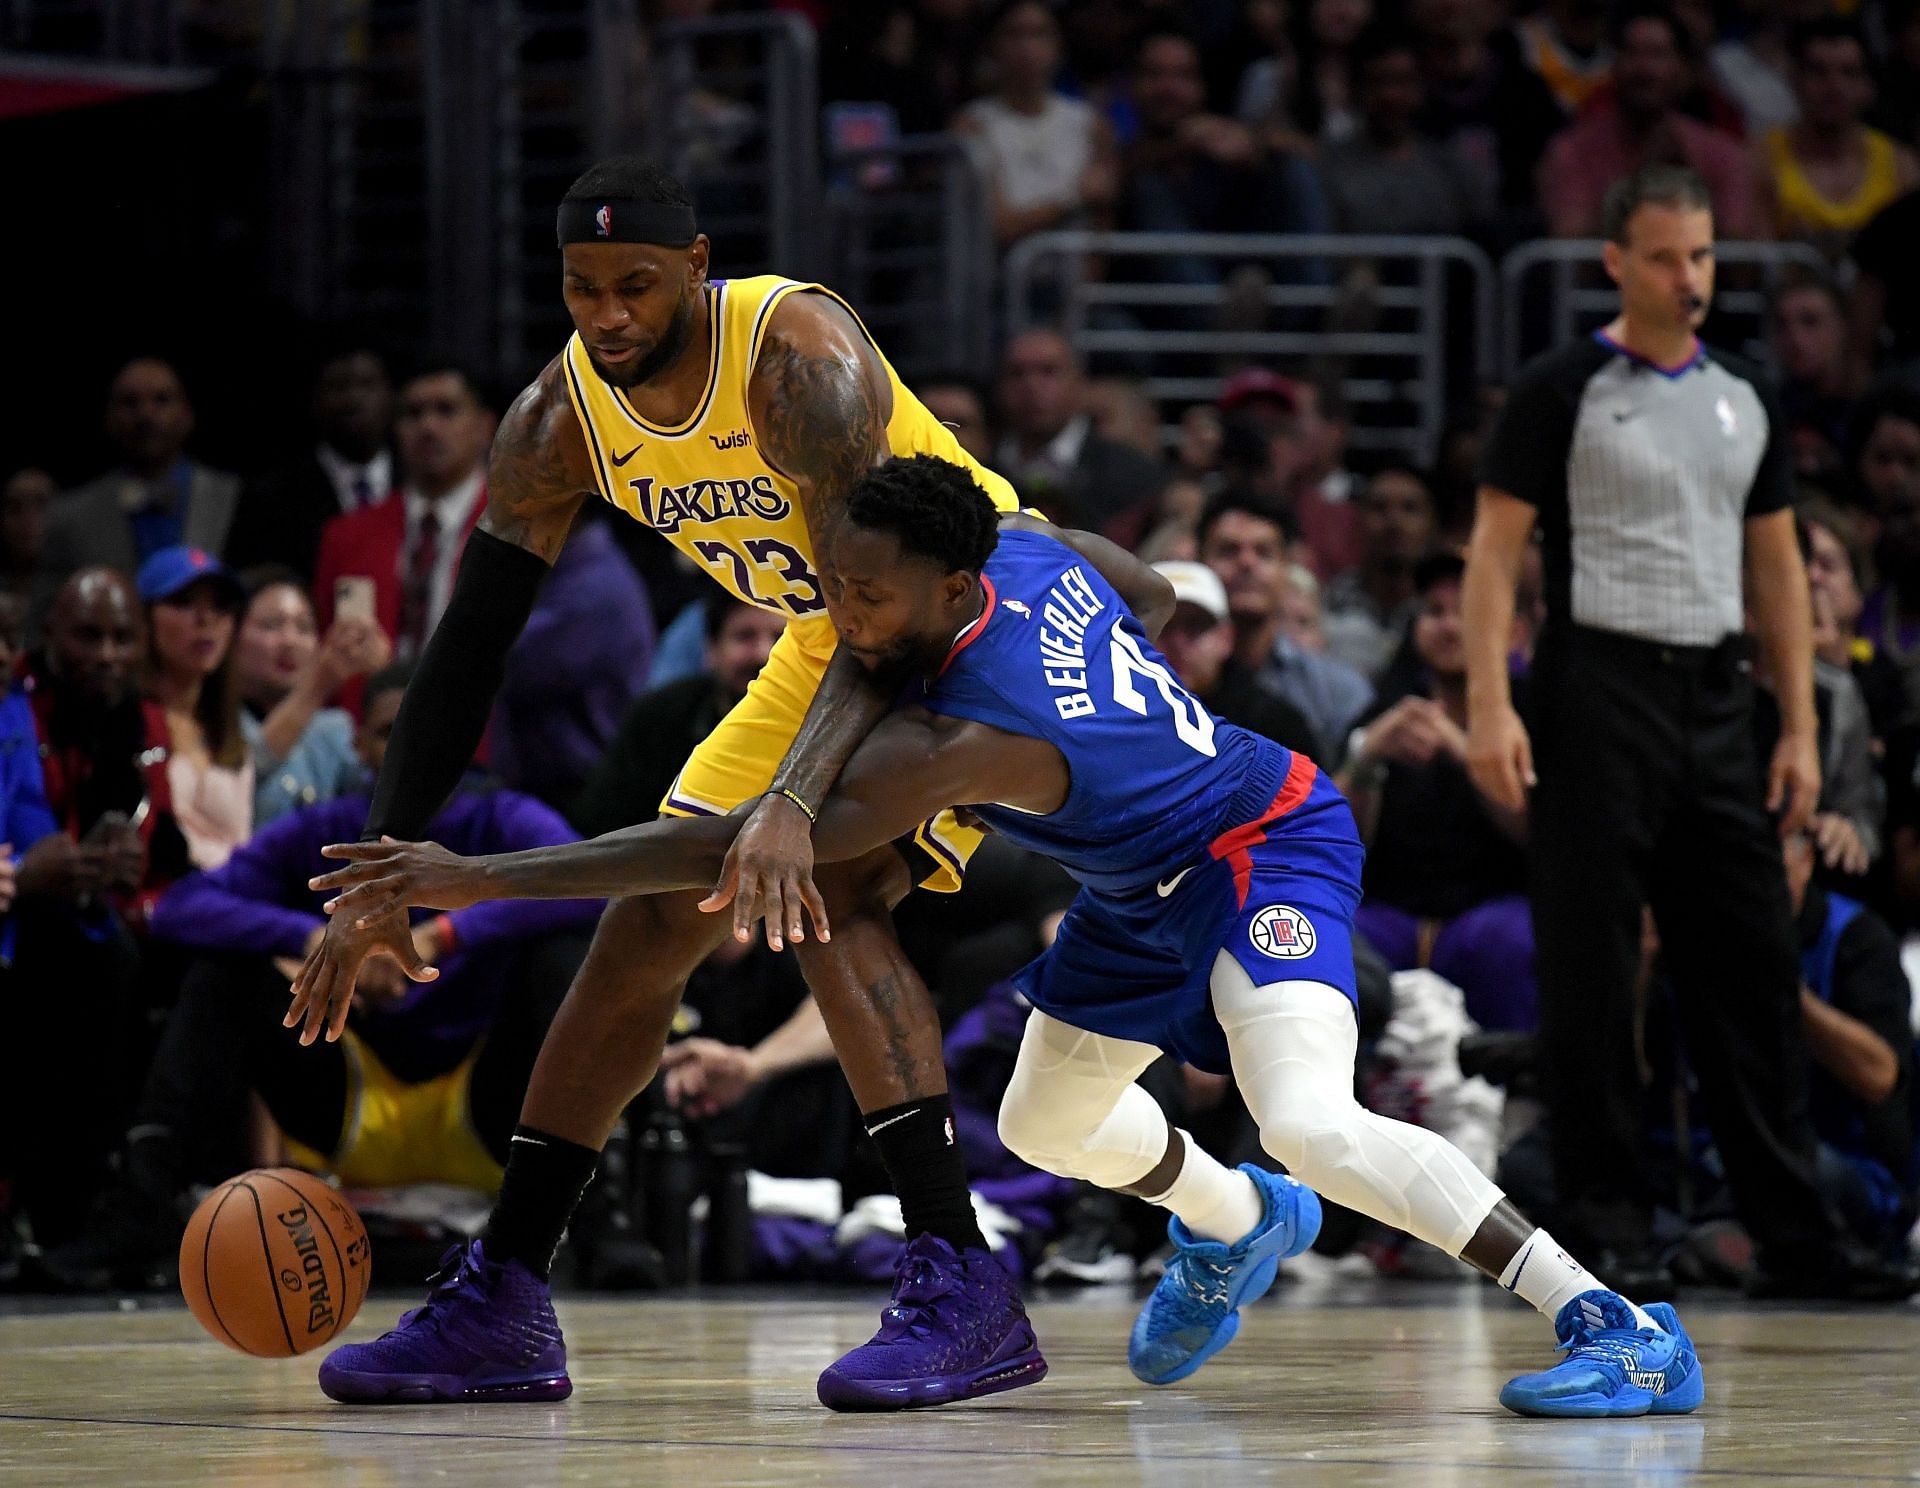 LeBron James of the LA Lakers against Patrick Beverley of the LA Clippers